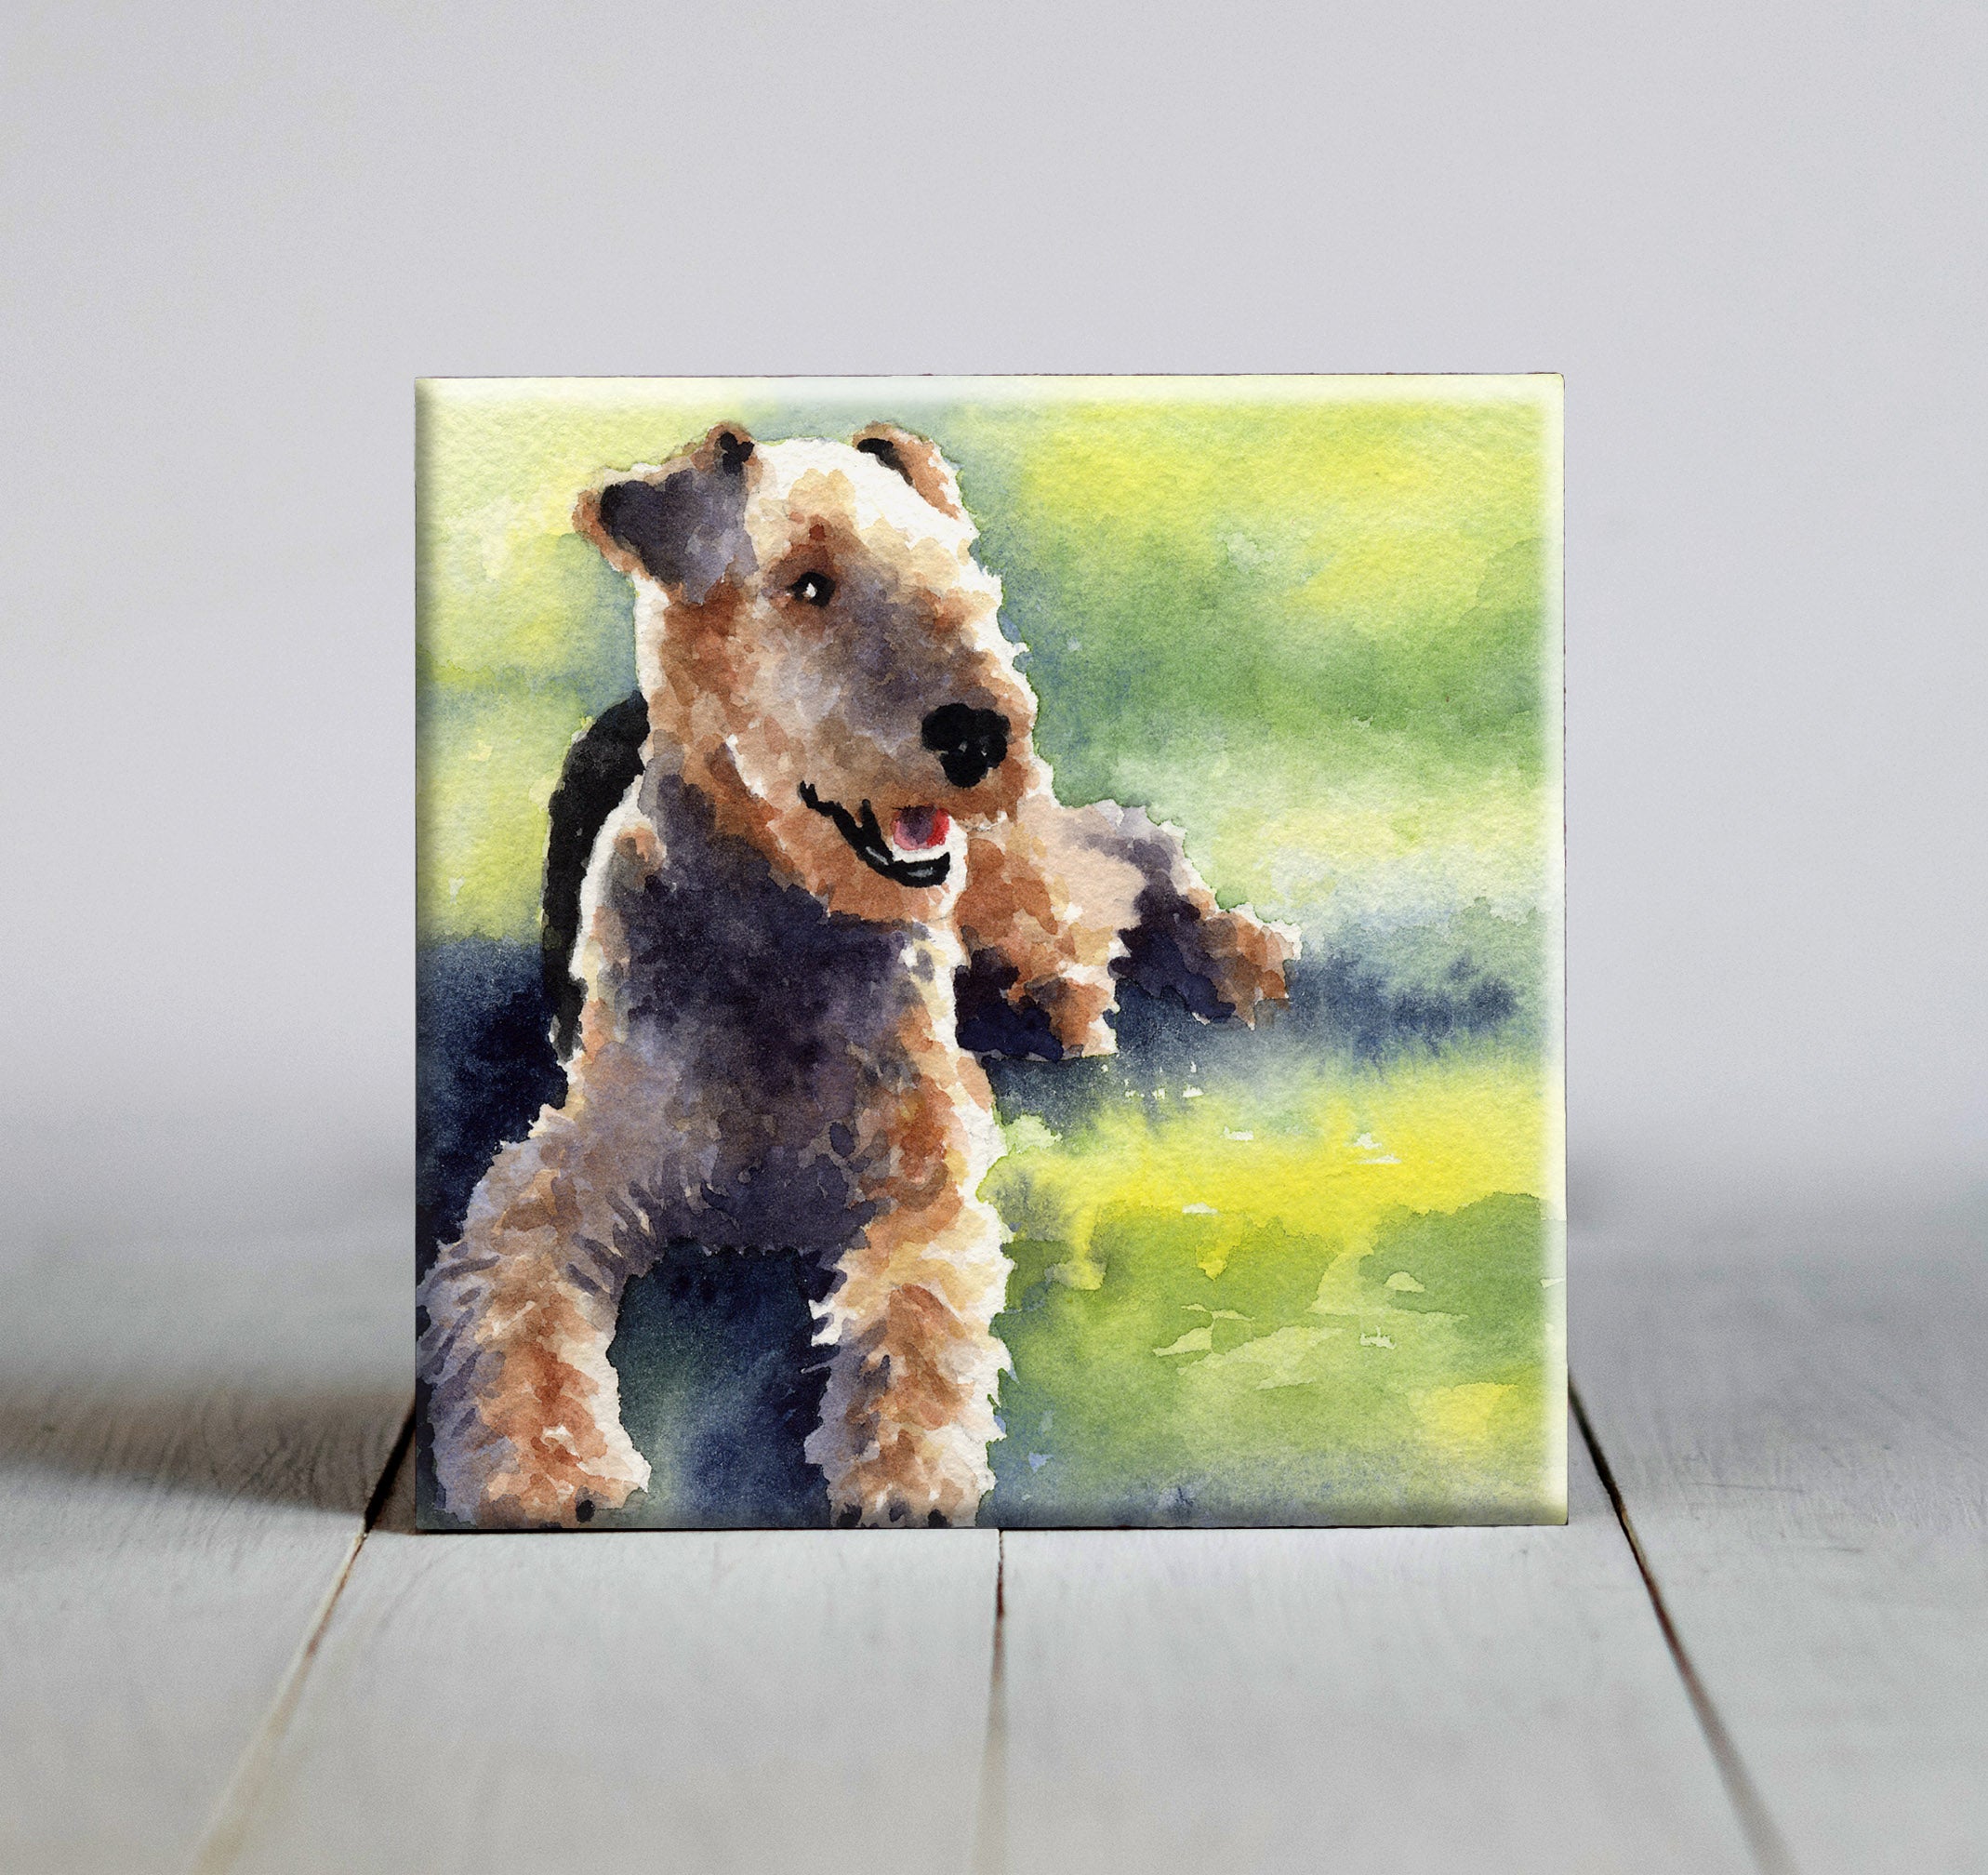 Airedale Terrier Contemporary Watercolor Dog Art Decorative Tile by Artist DJ Rogers